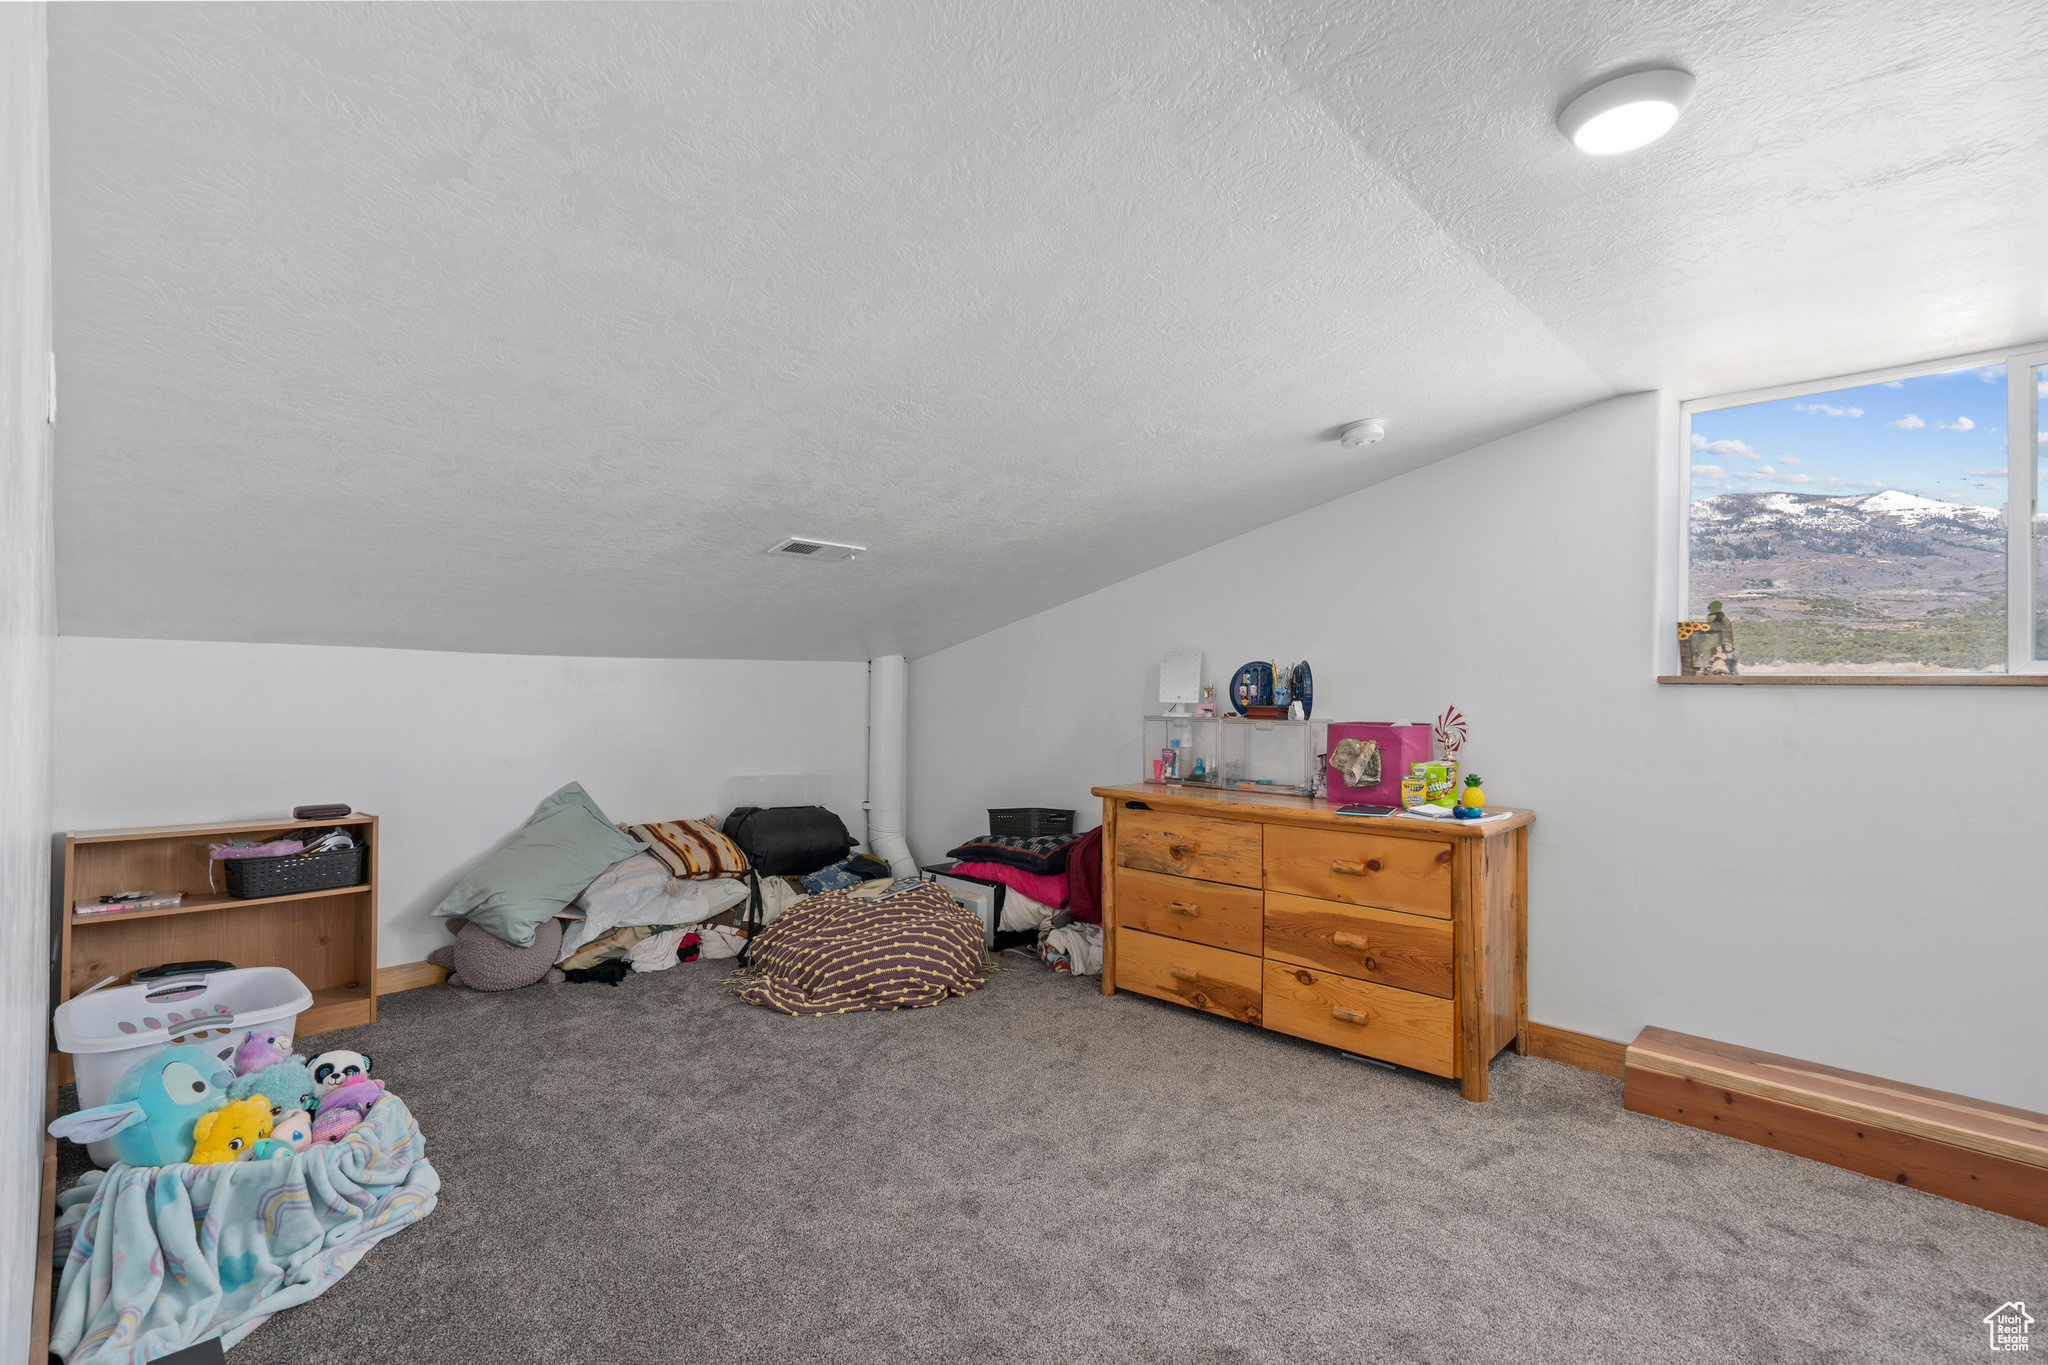 Playroom featuring a textured ceiling, vaulted ceiling, and carpet flooring